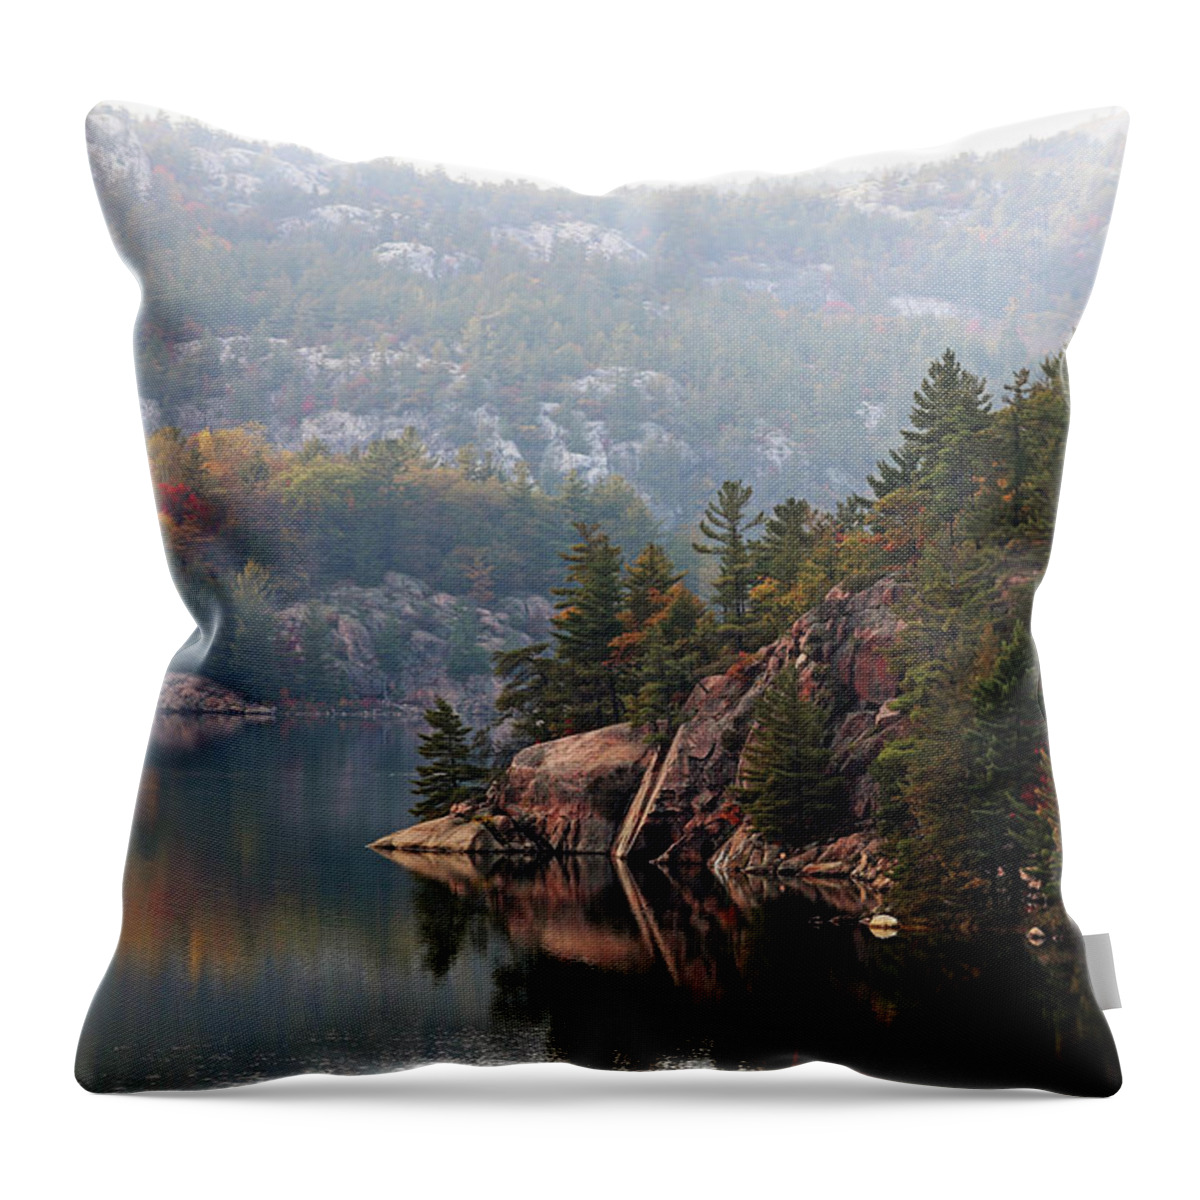 George Lake Throw Pillow featuring the photograph Rainy Day George Lake by Debbie Oppermann